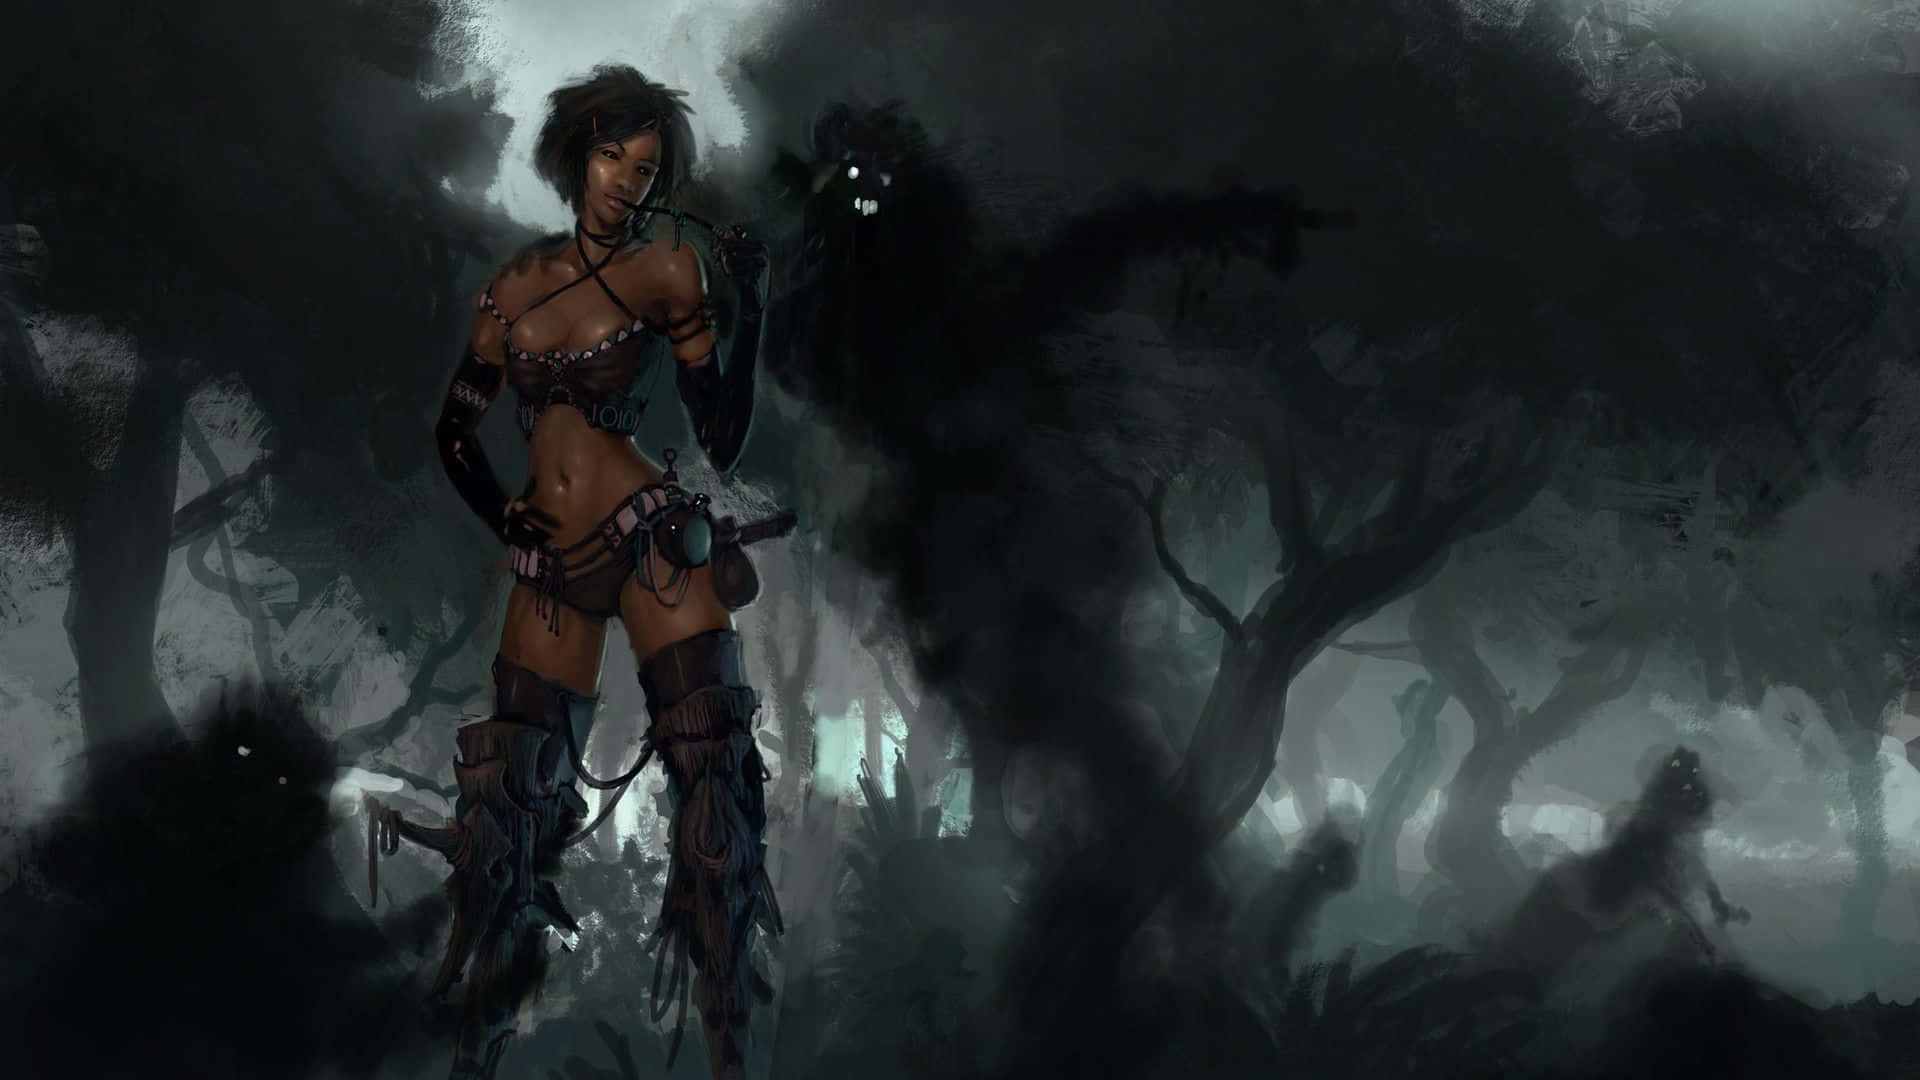 Sinister Evil Witch in a Dark Forest Wallpaper